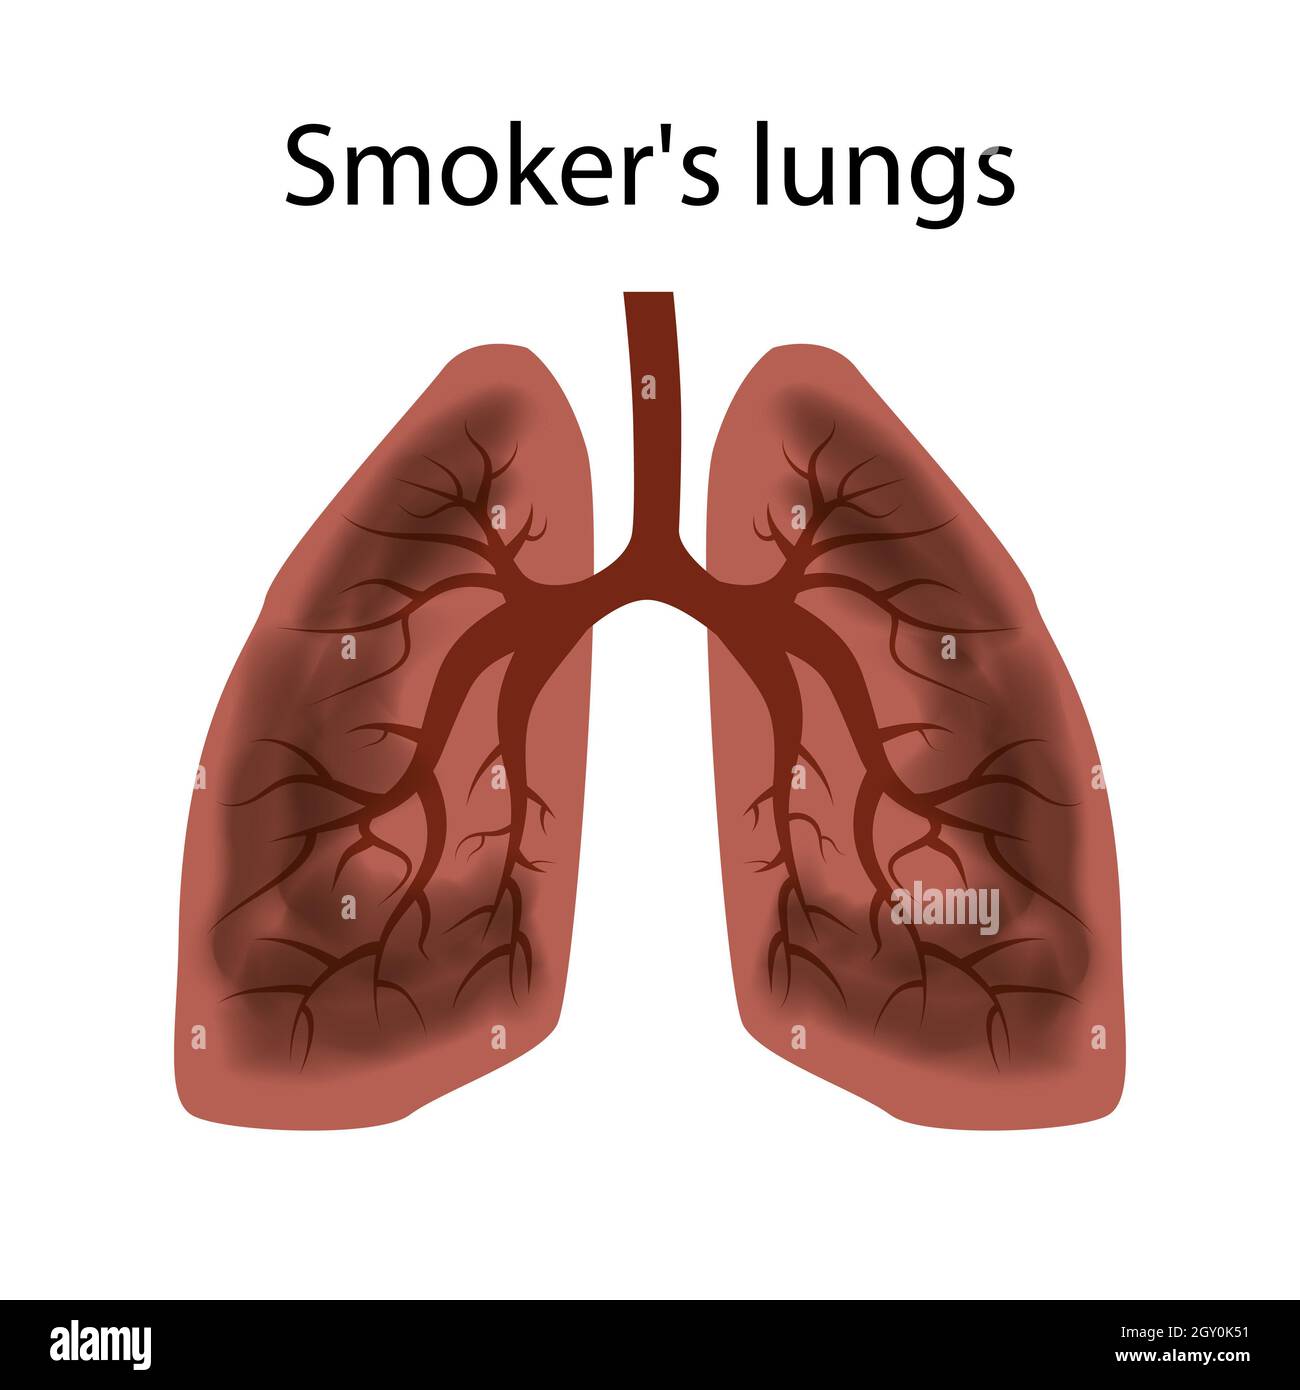 Smoker's lungs. Damage to the lungs of a person caused by smoking. Isolated vector EPS10. Stock Photo